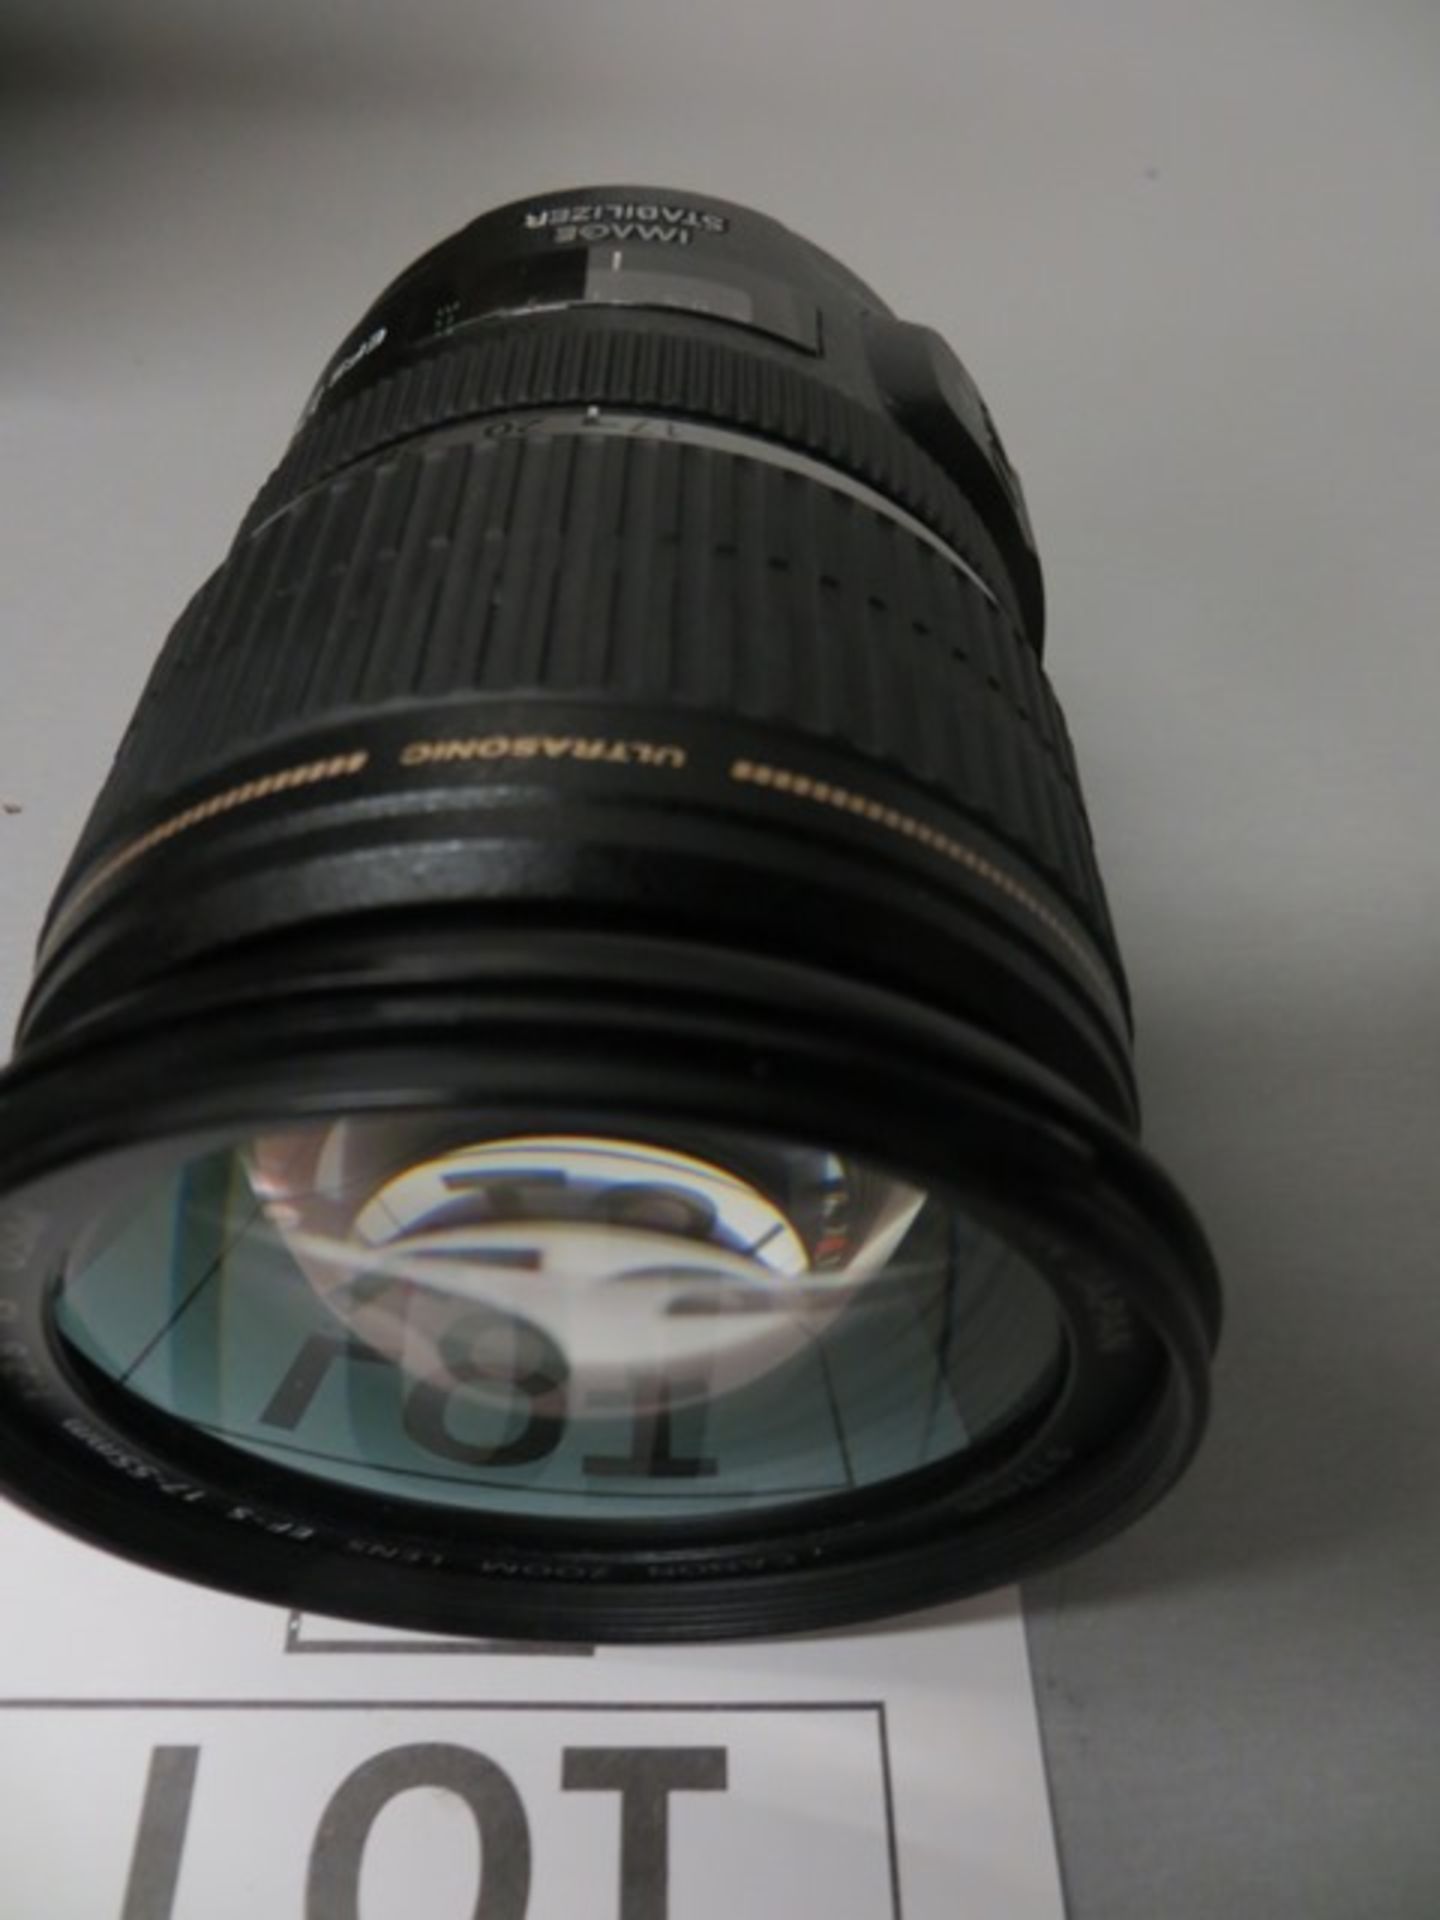 Canon EF-S 17-55mm zoom lens s/n 11870093 c/w ray shade - Image 3 of 3